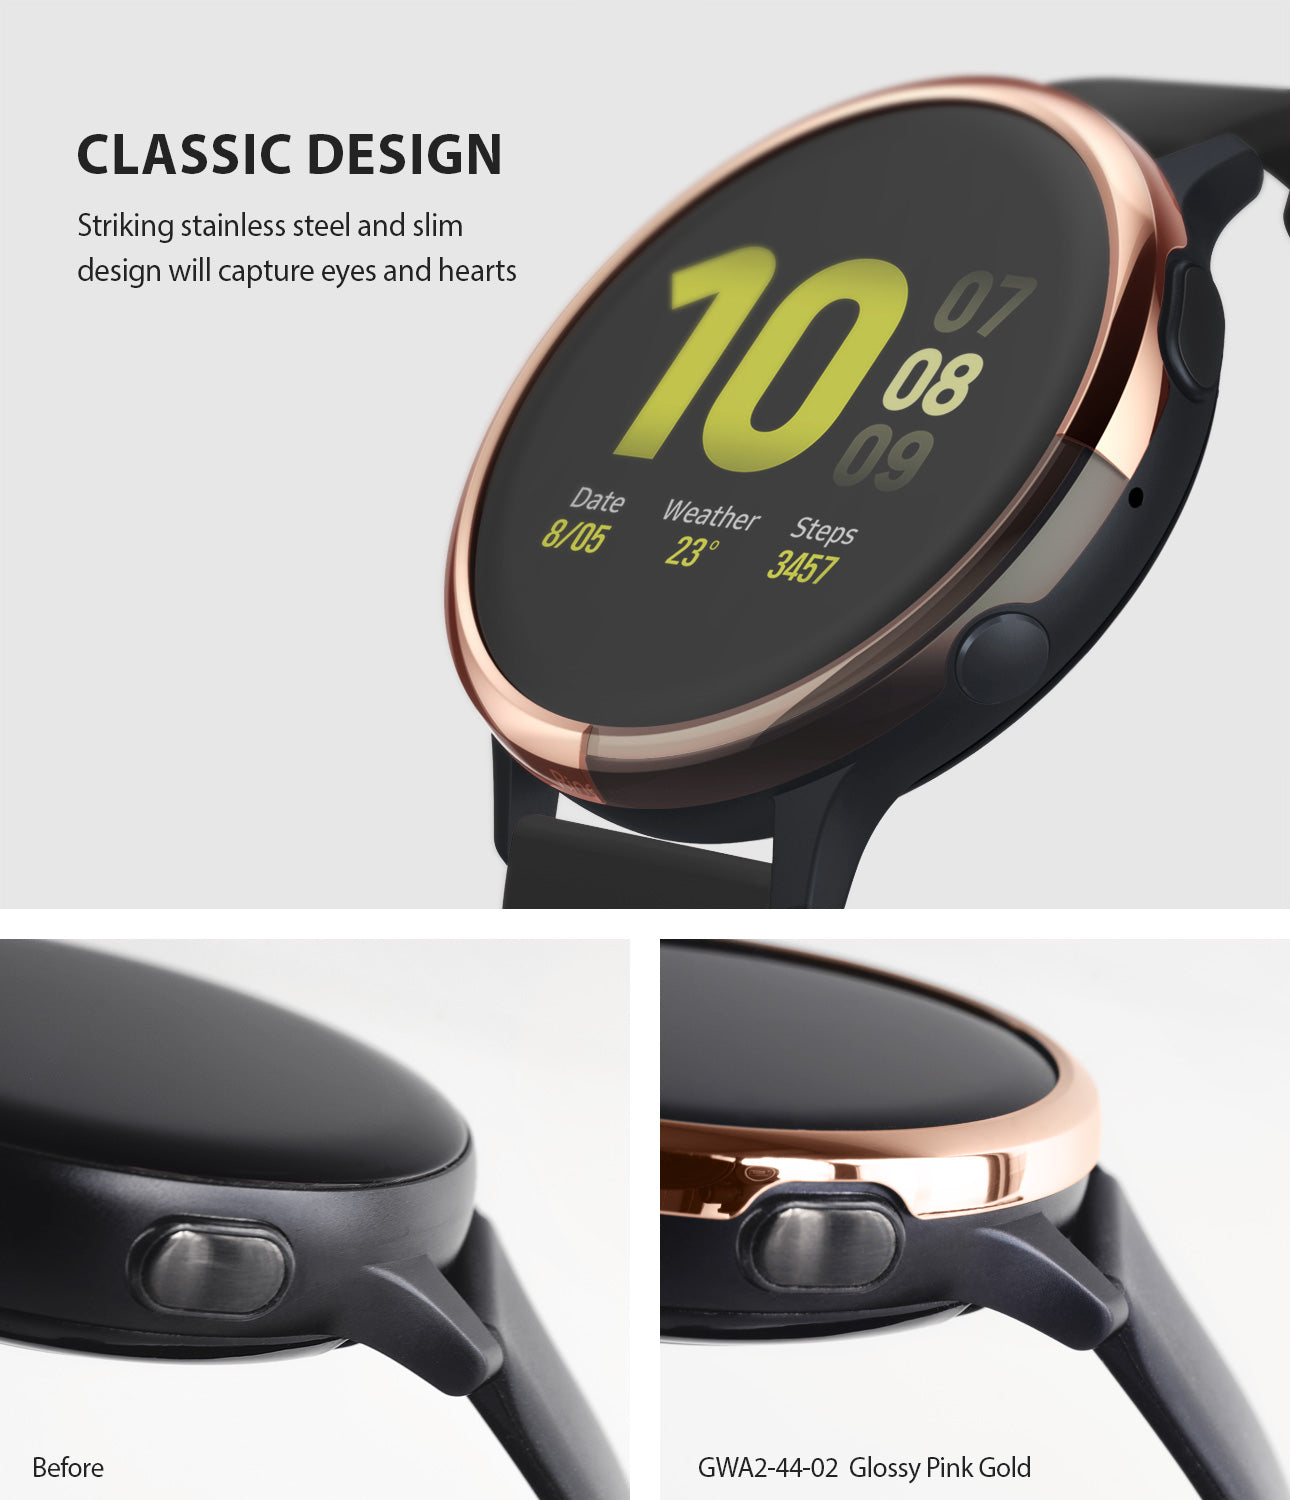 ringke bezel styling for galaxy watch active 2 44mm stainless steel classic design